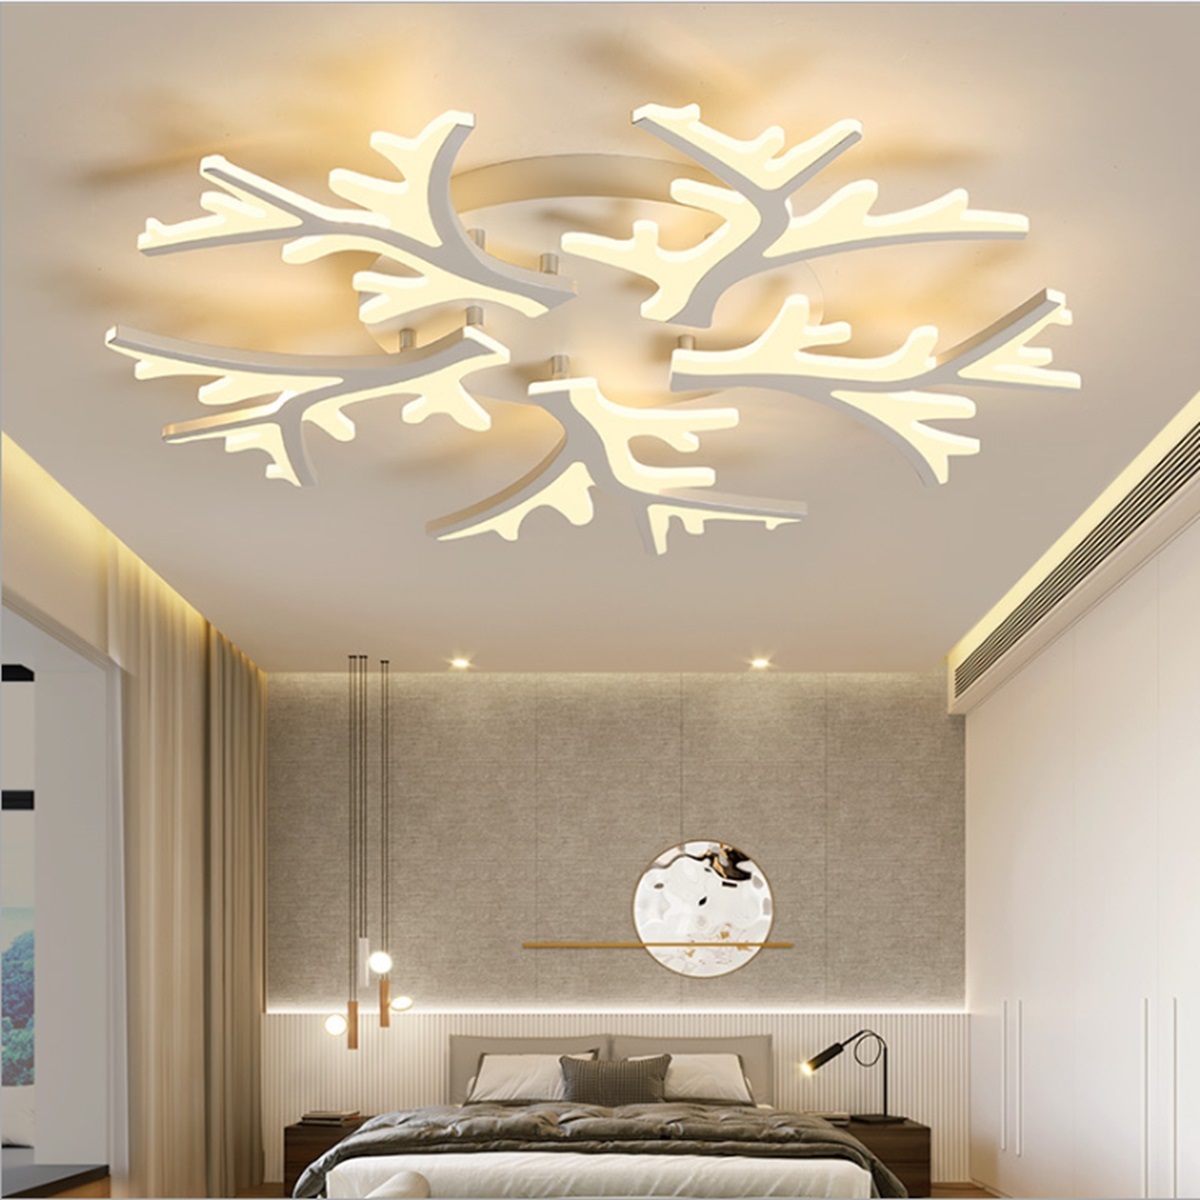 Find LED Ceiling Light Pendant Lamp Hallway Bedroom Dimmable Remote Fixture Decor for Sale on Gipsybee.com with cryptocurrencies